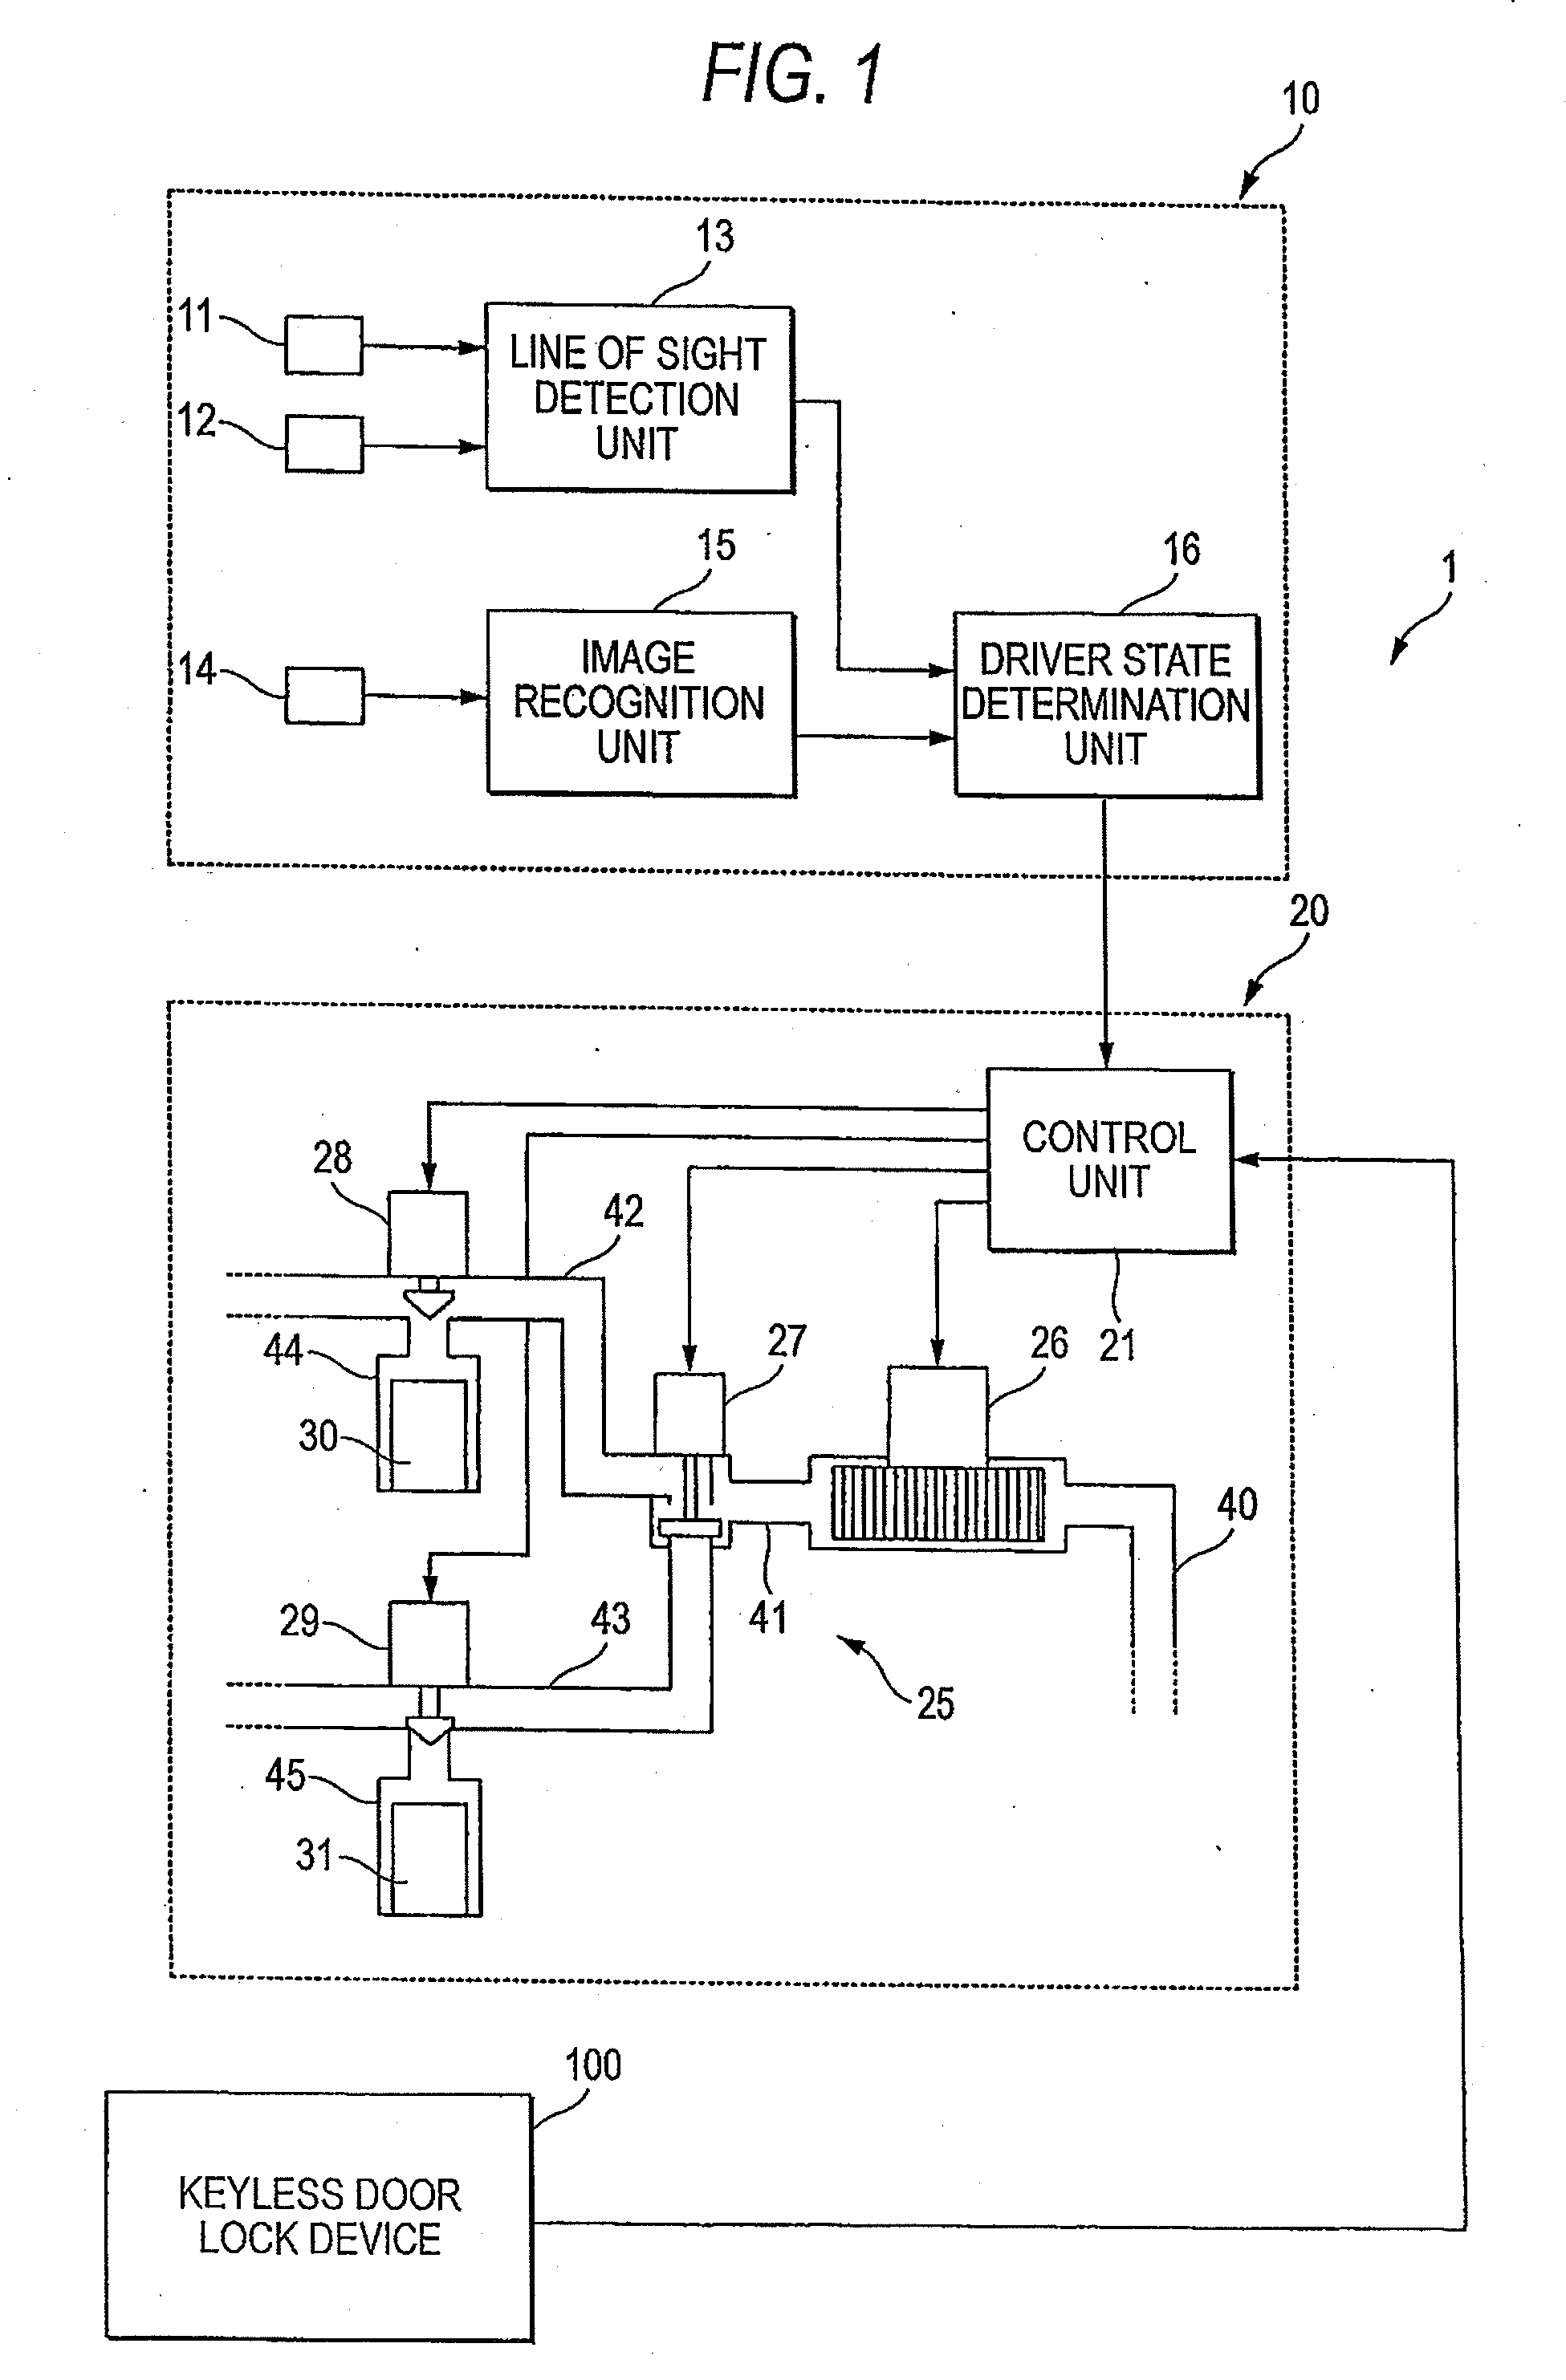 Driving support system using fragrance emitting